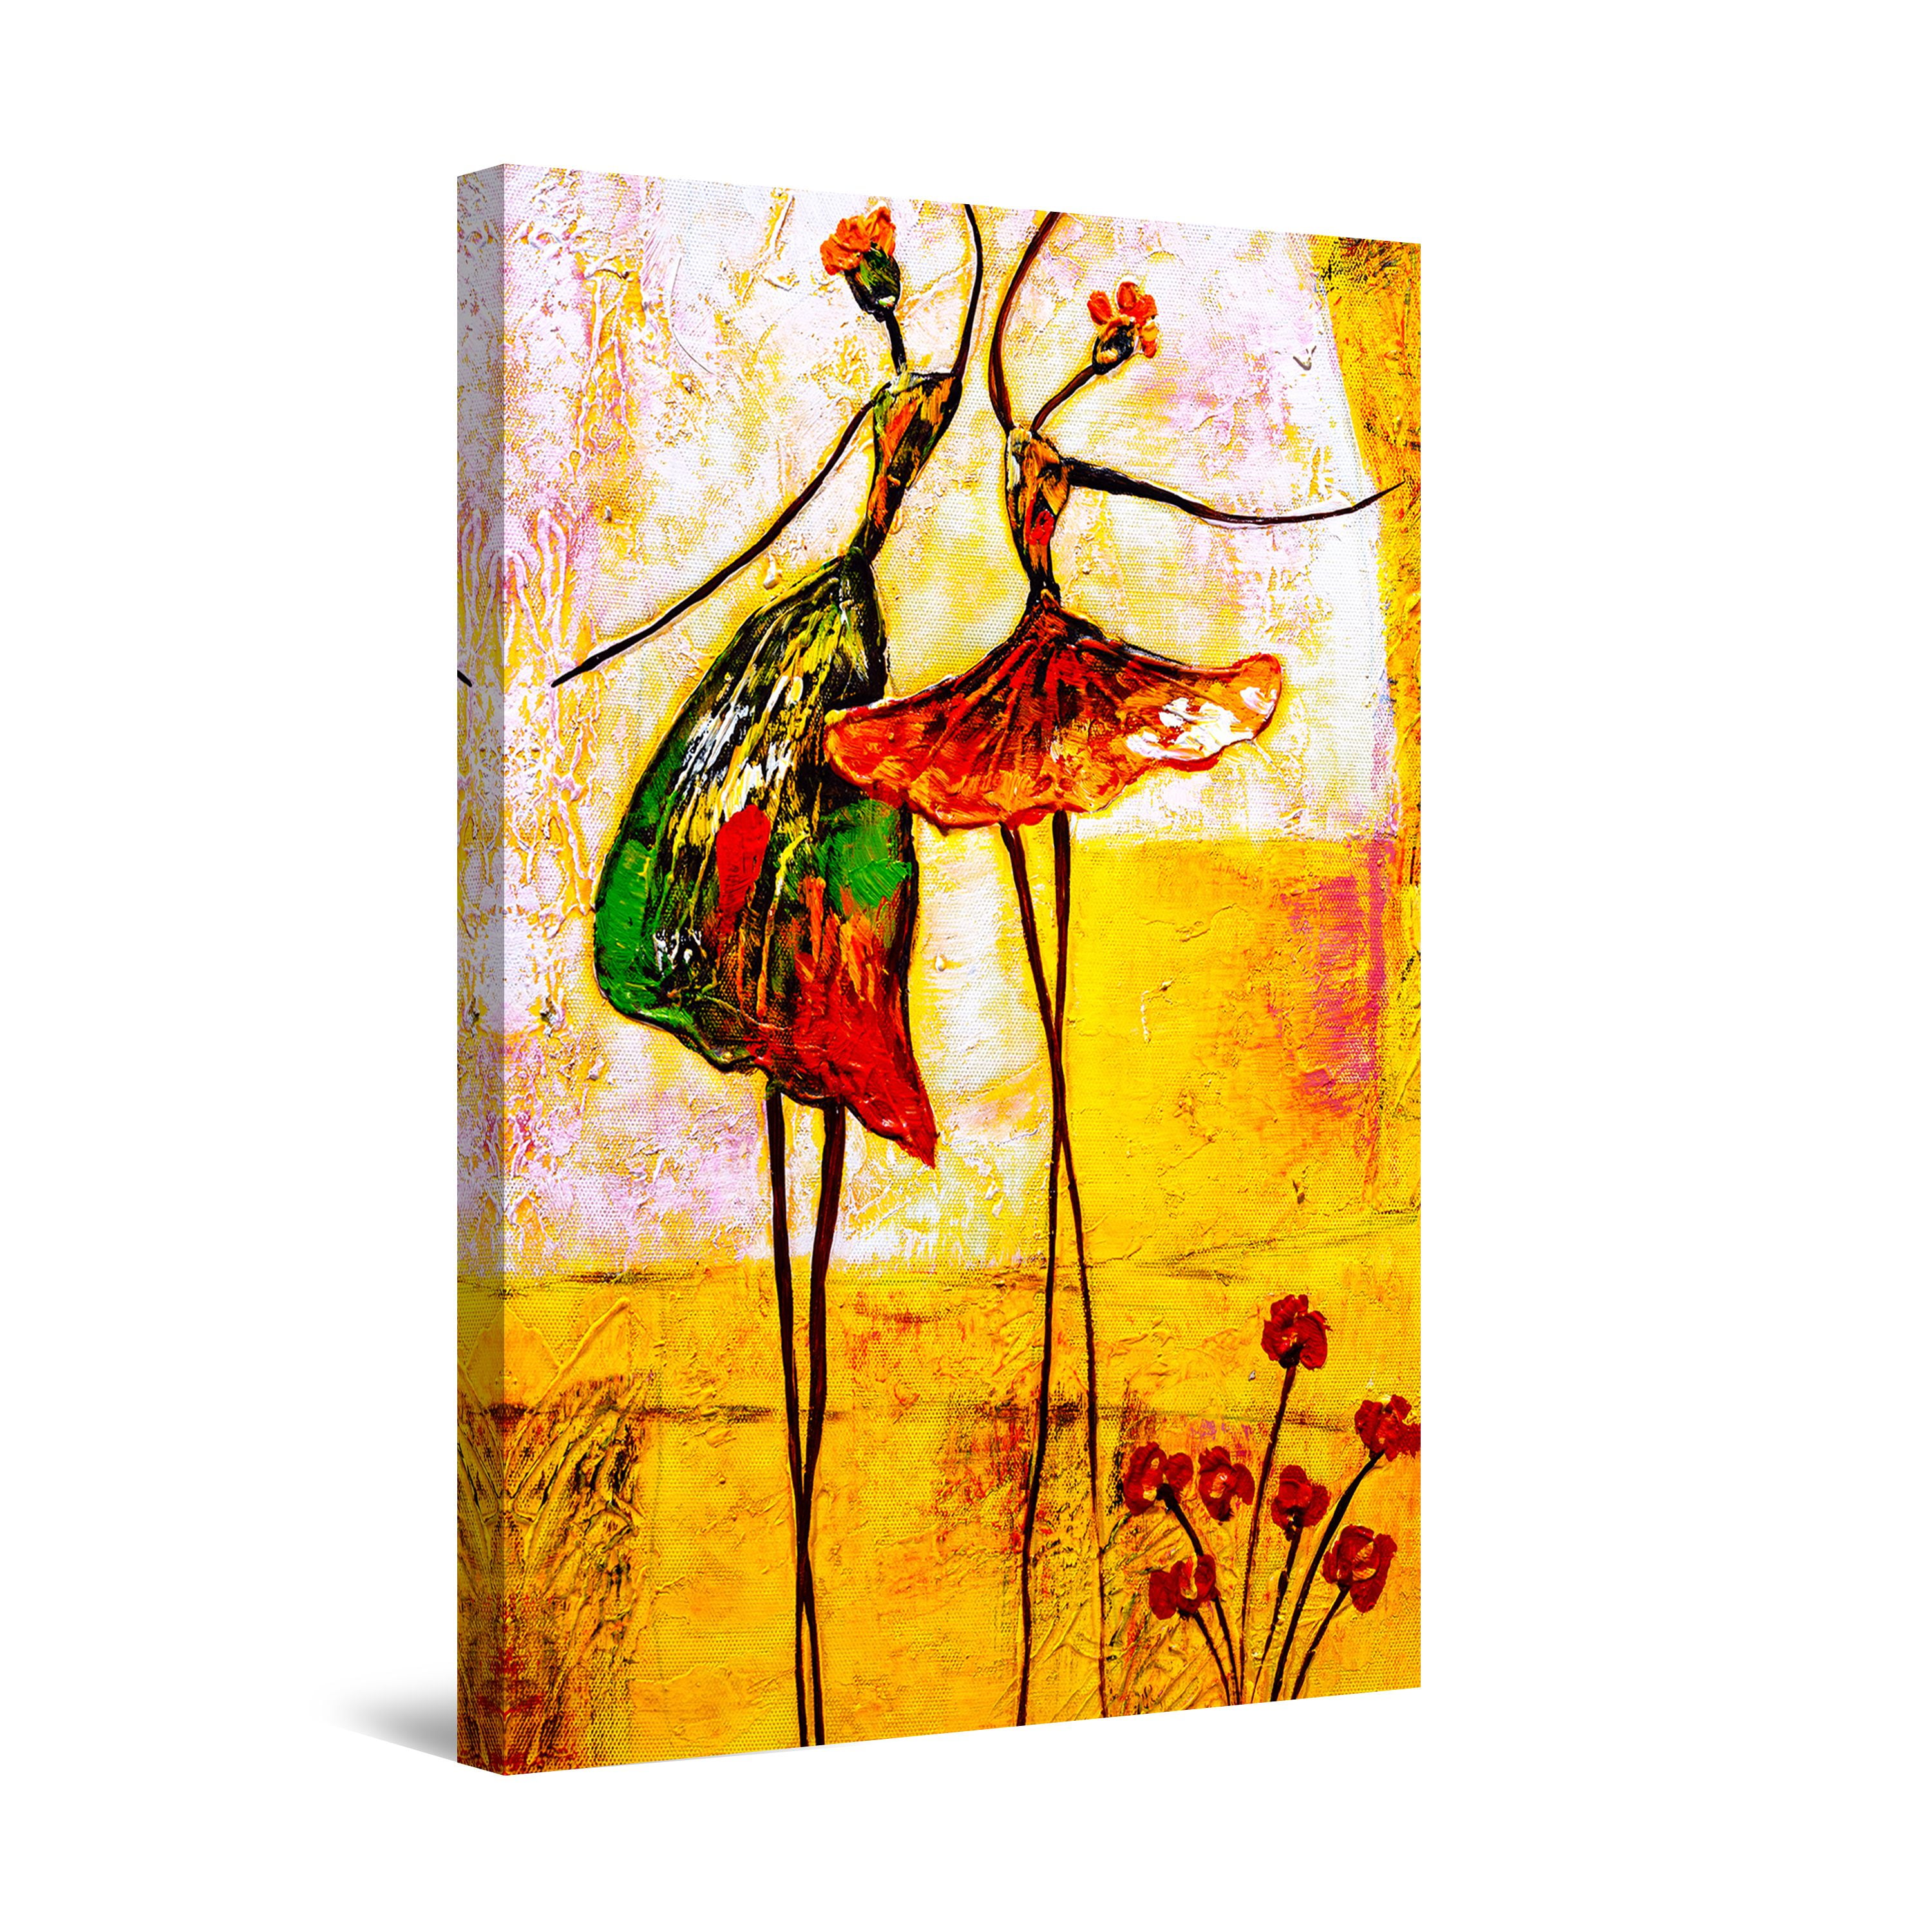 Details about   Abstract Multi Coloured Paint Blank Greeting Card With Envelope 